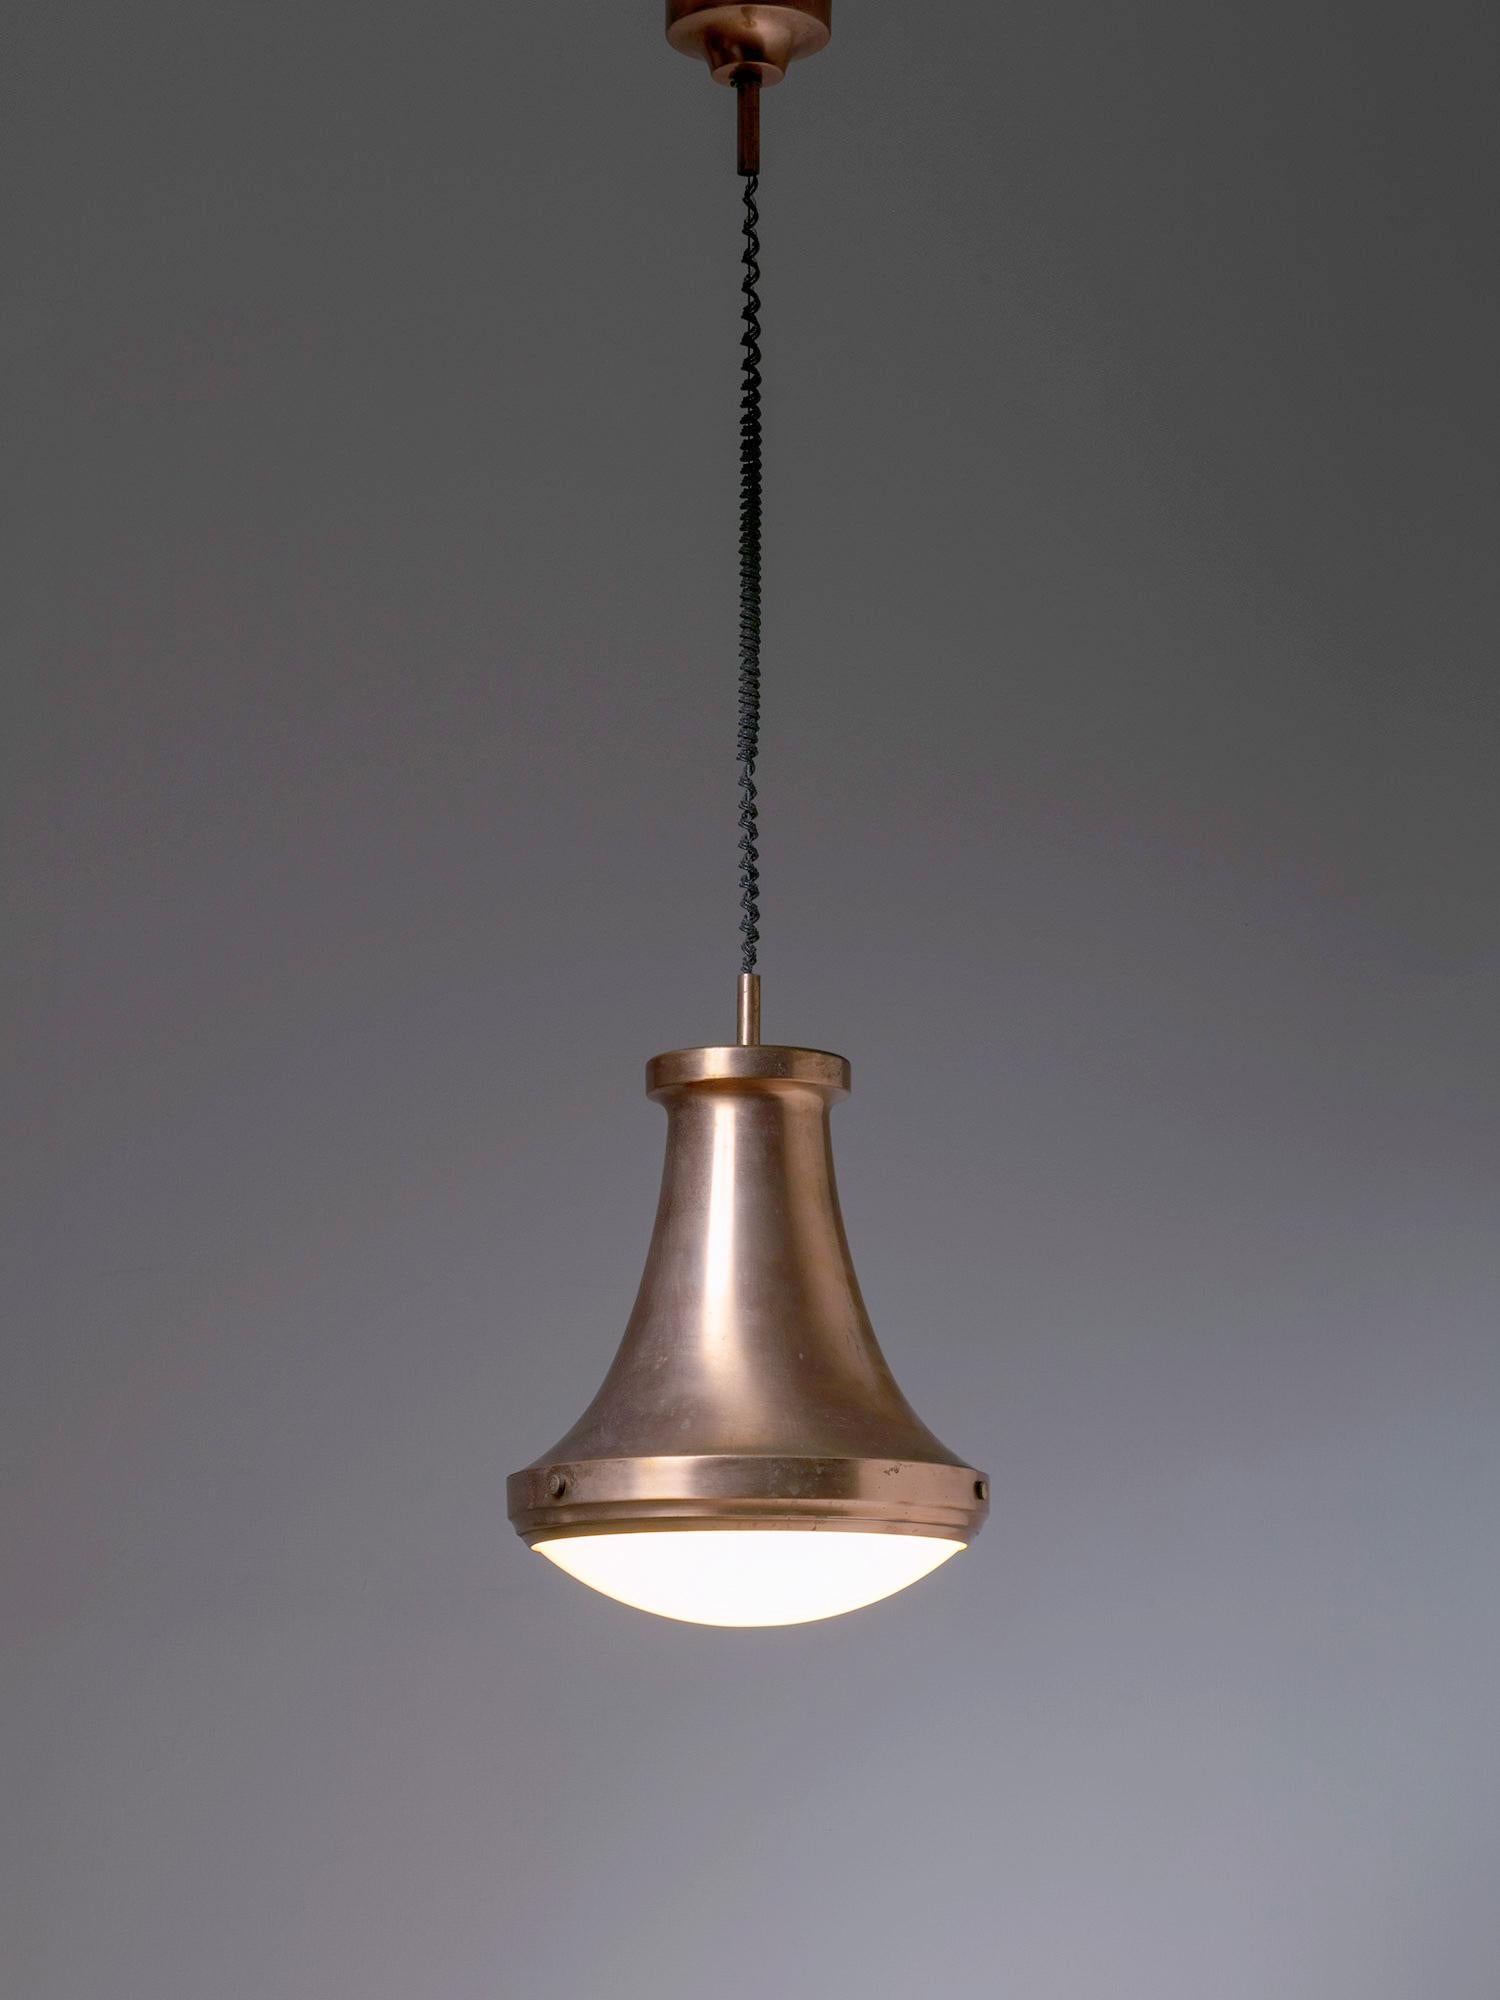 Italian 60s copper pendant lamp.
Large metal body and frosted glass shade.